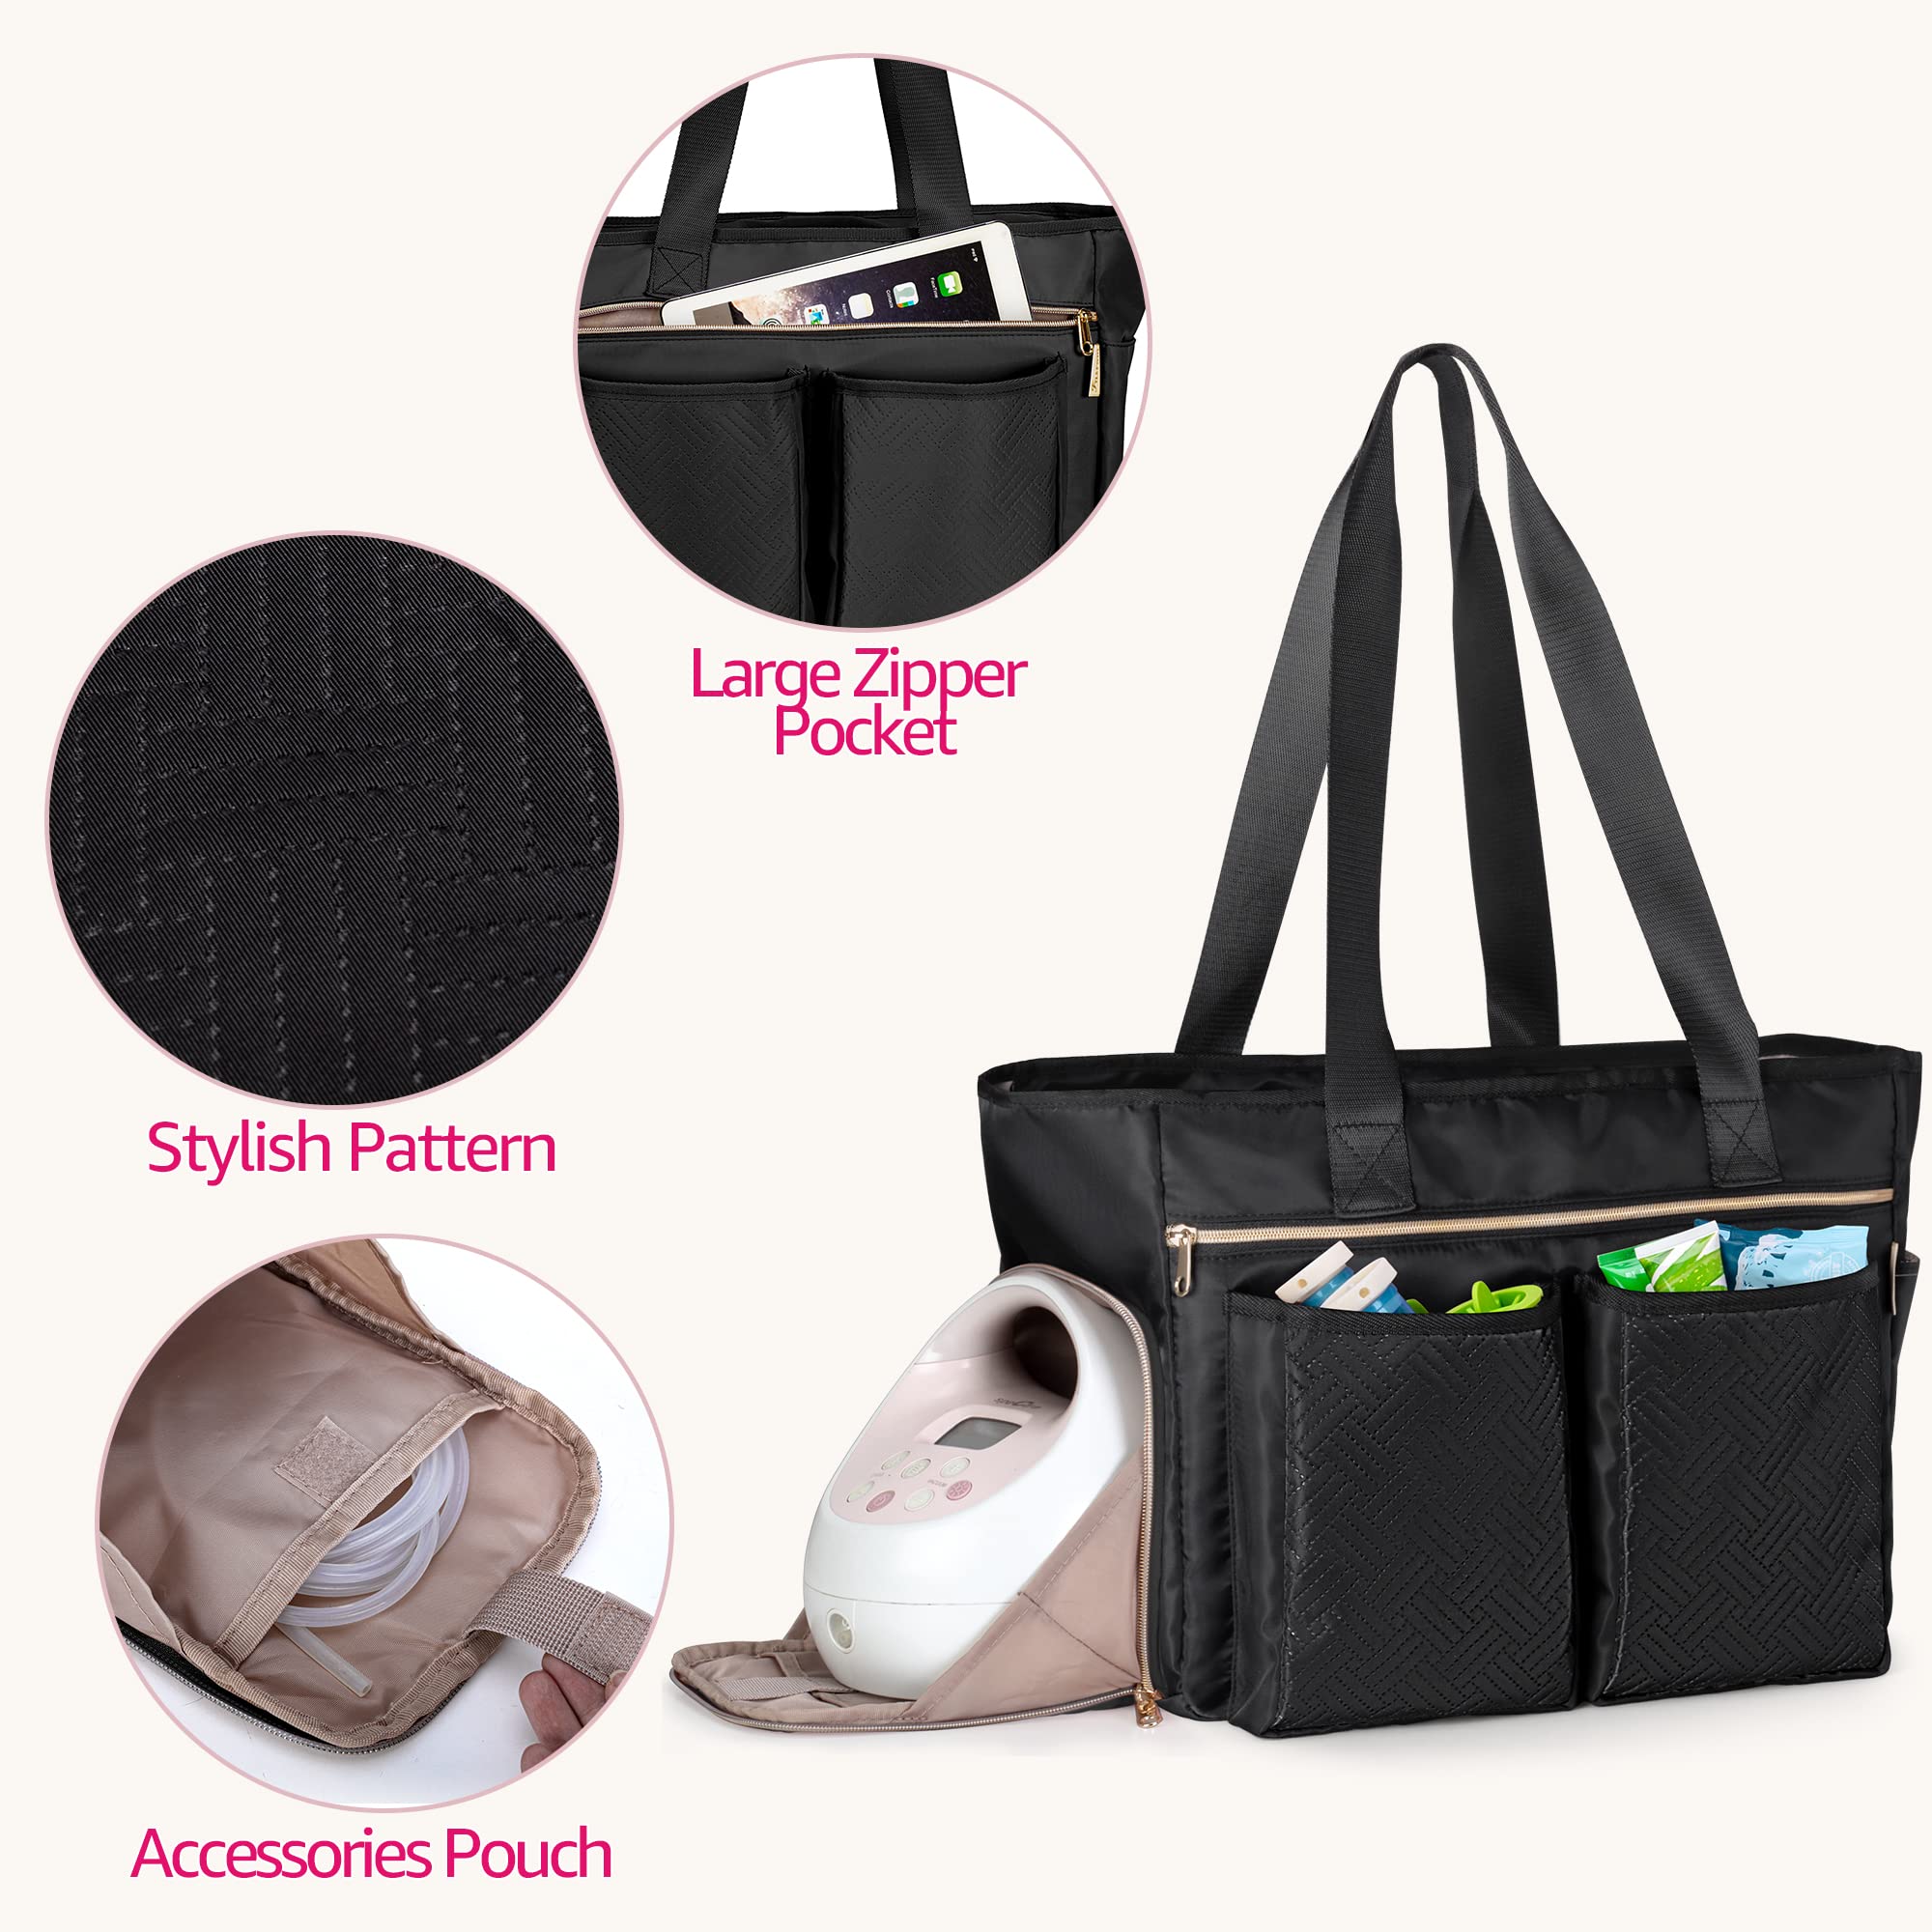 Fasrom Breast Pump Bag Bundle with Breastmilk Cooler Bag Fits 4 Large Baby Bottles up to 9 Ounce